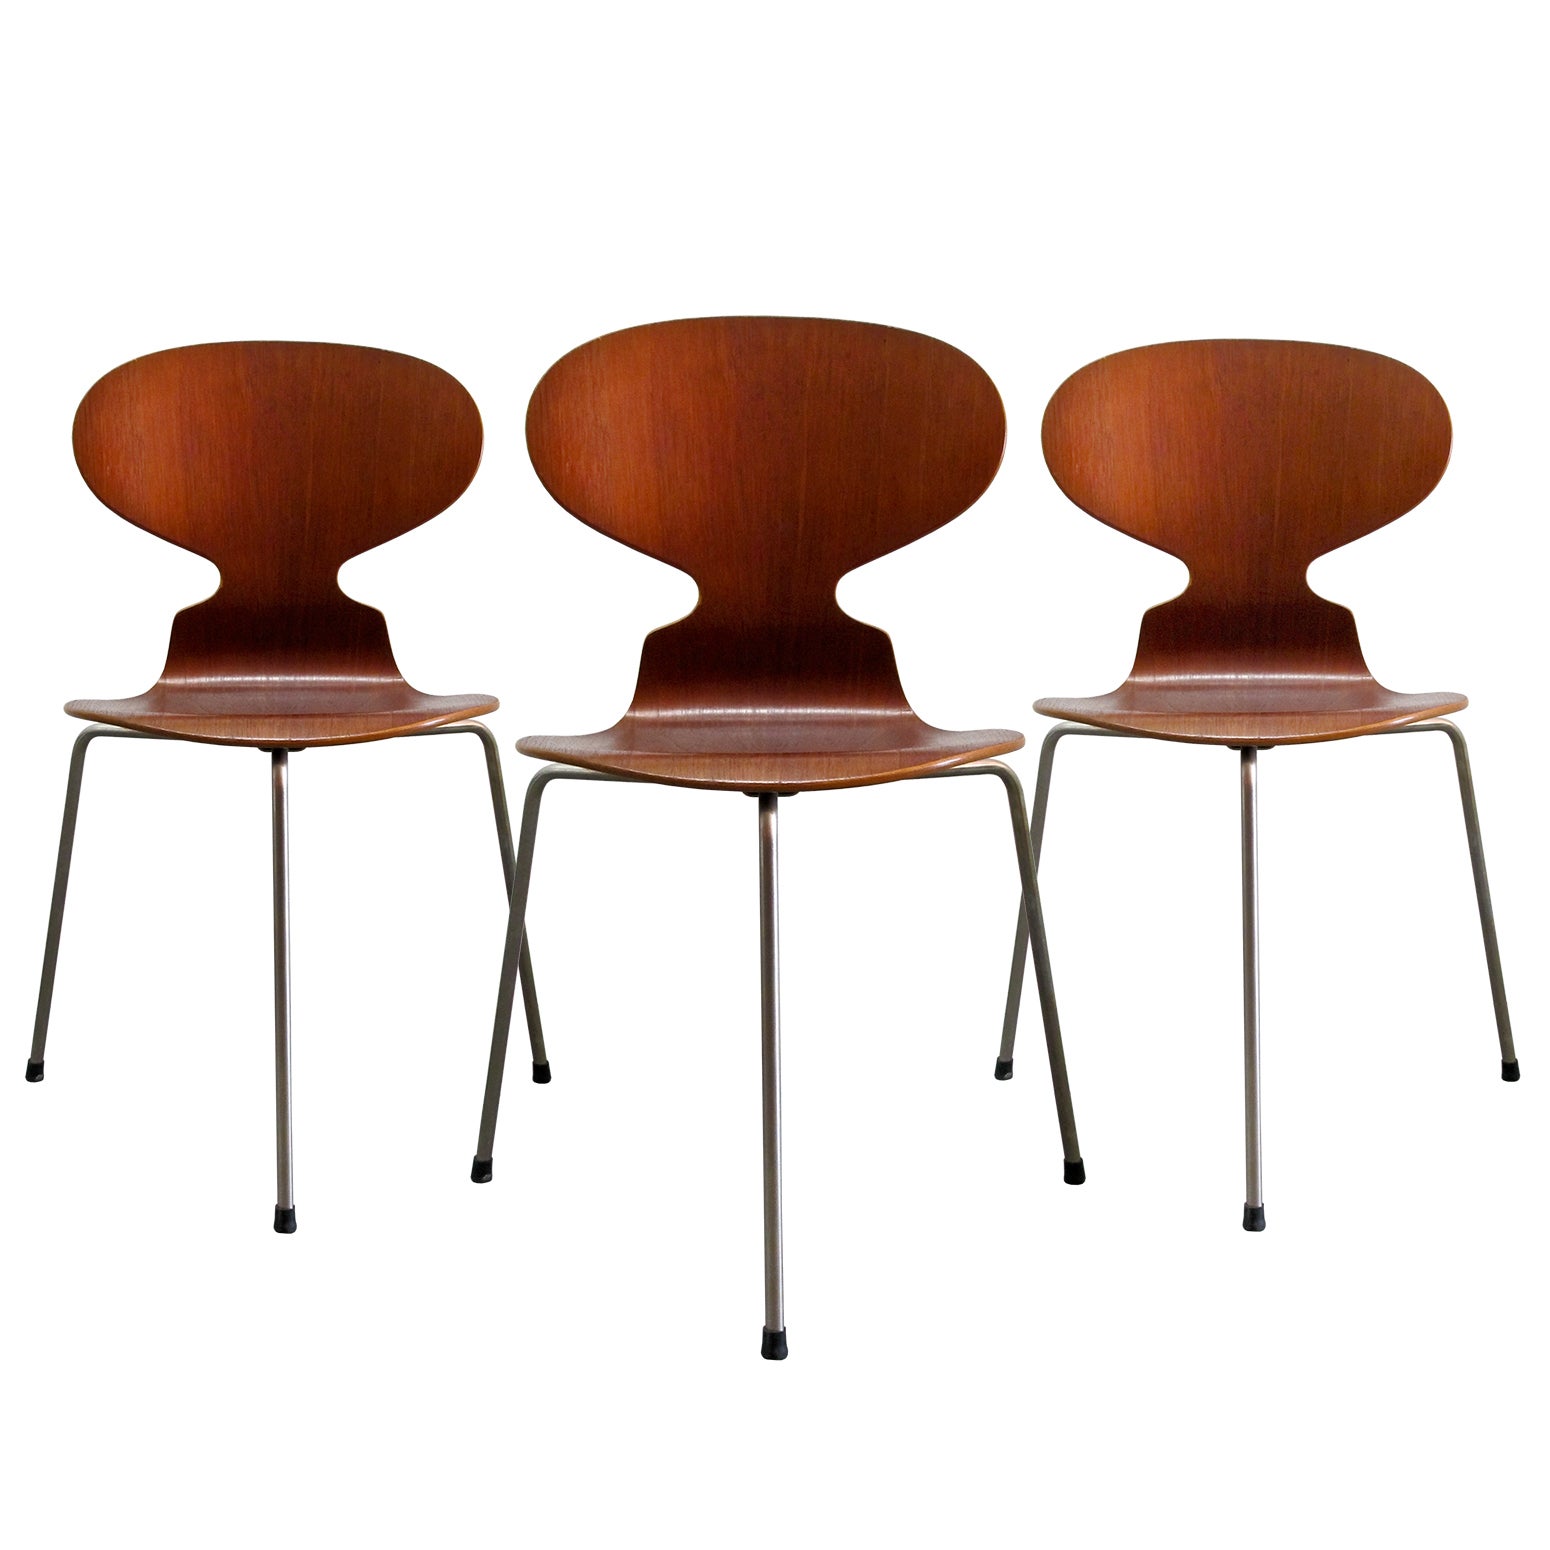 Arne Jacobsen Ant Chairs